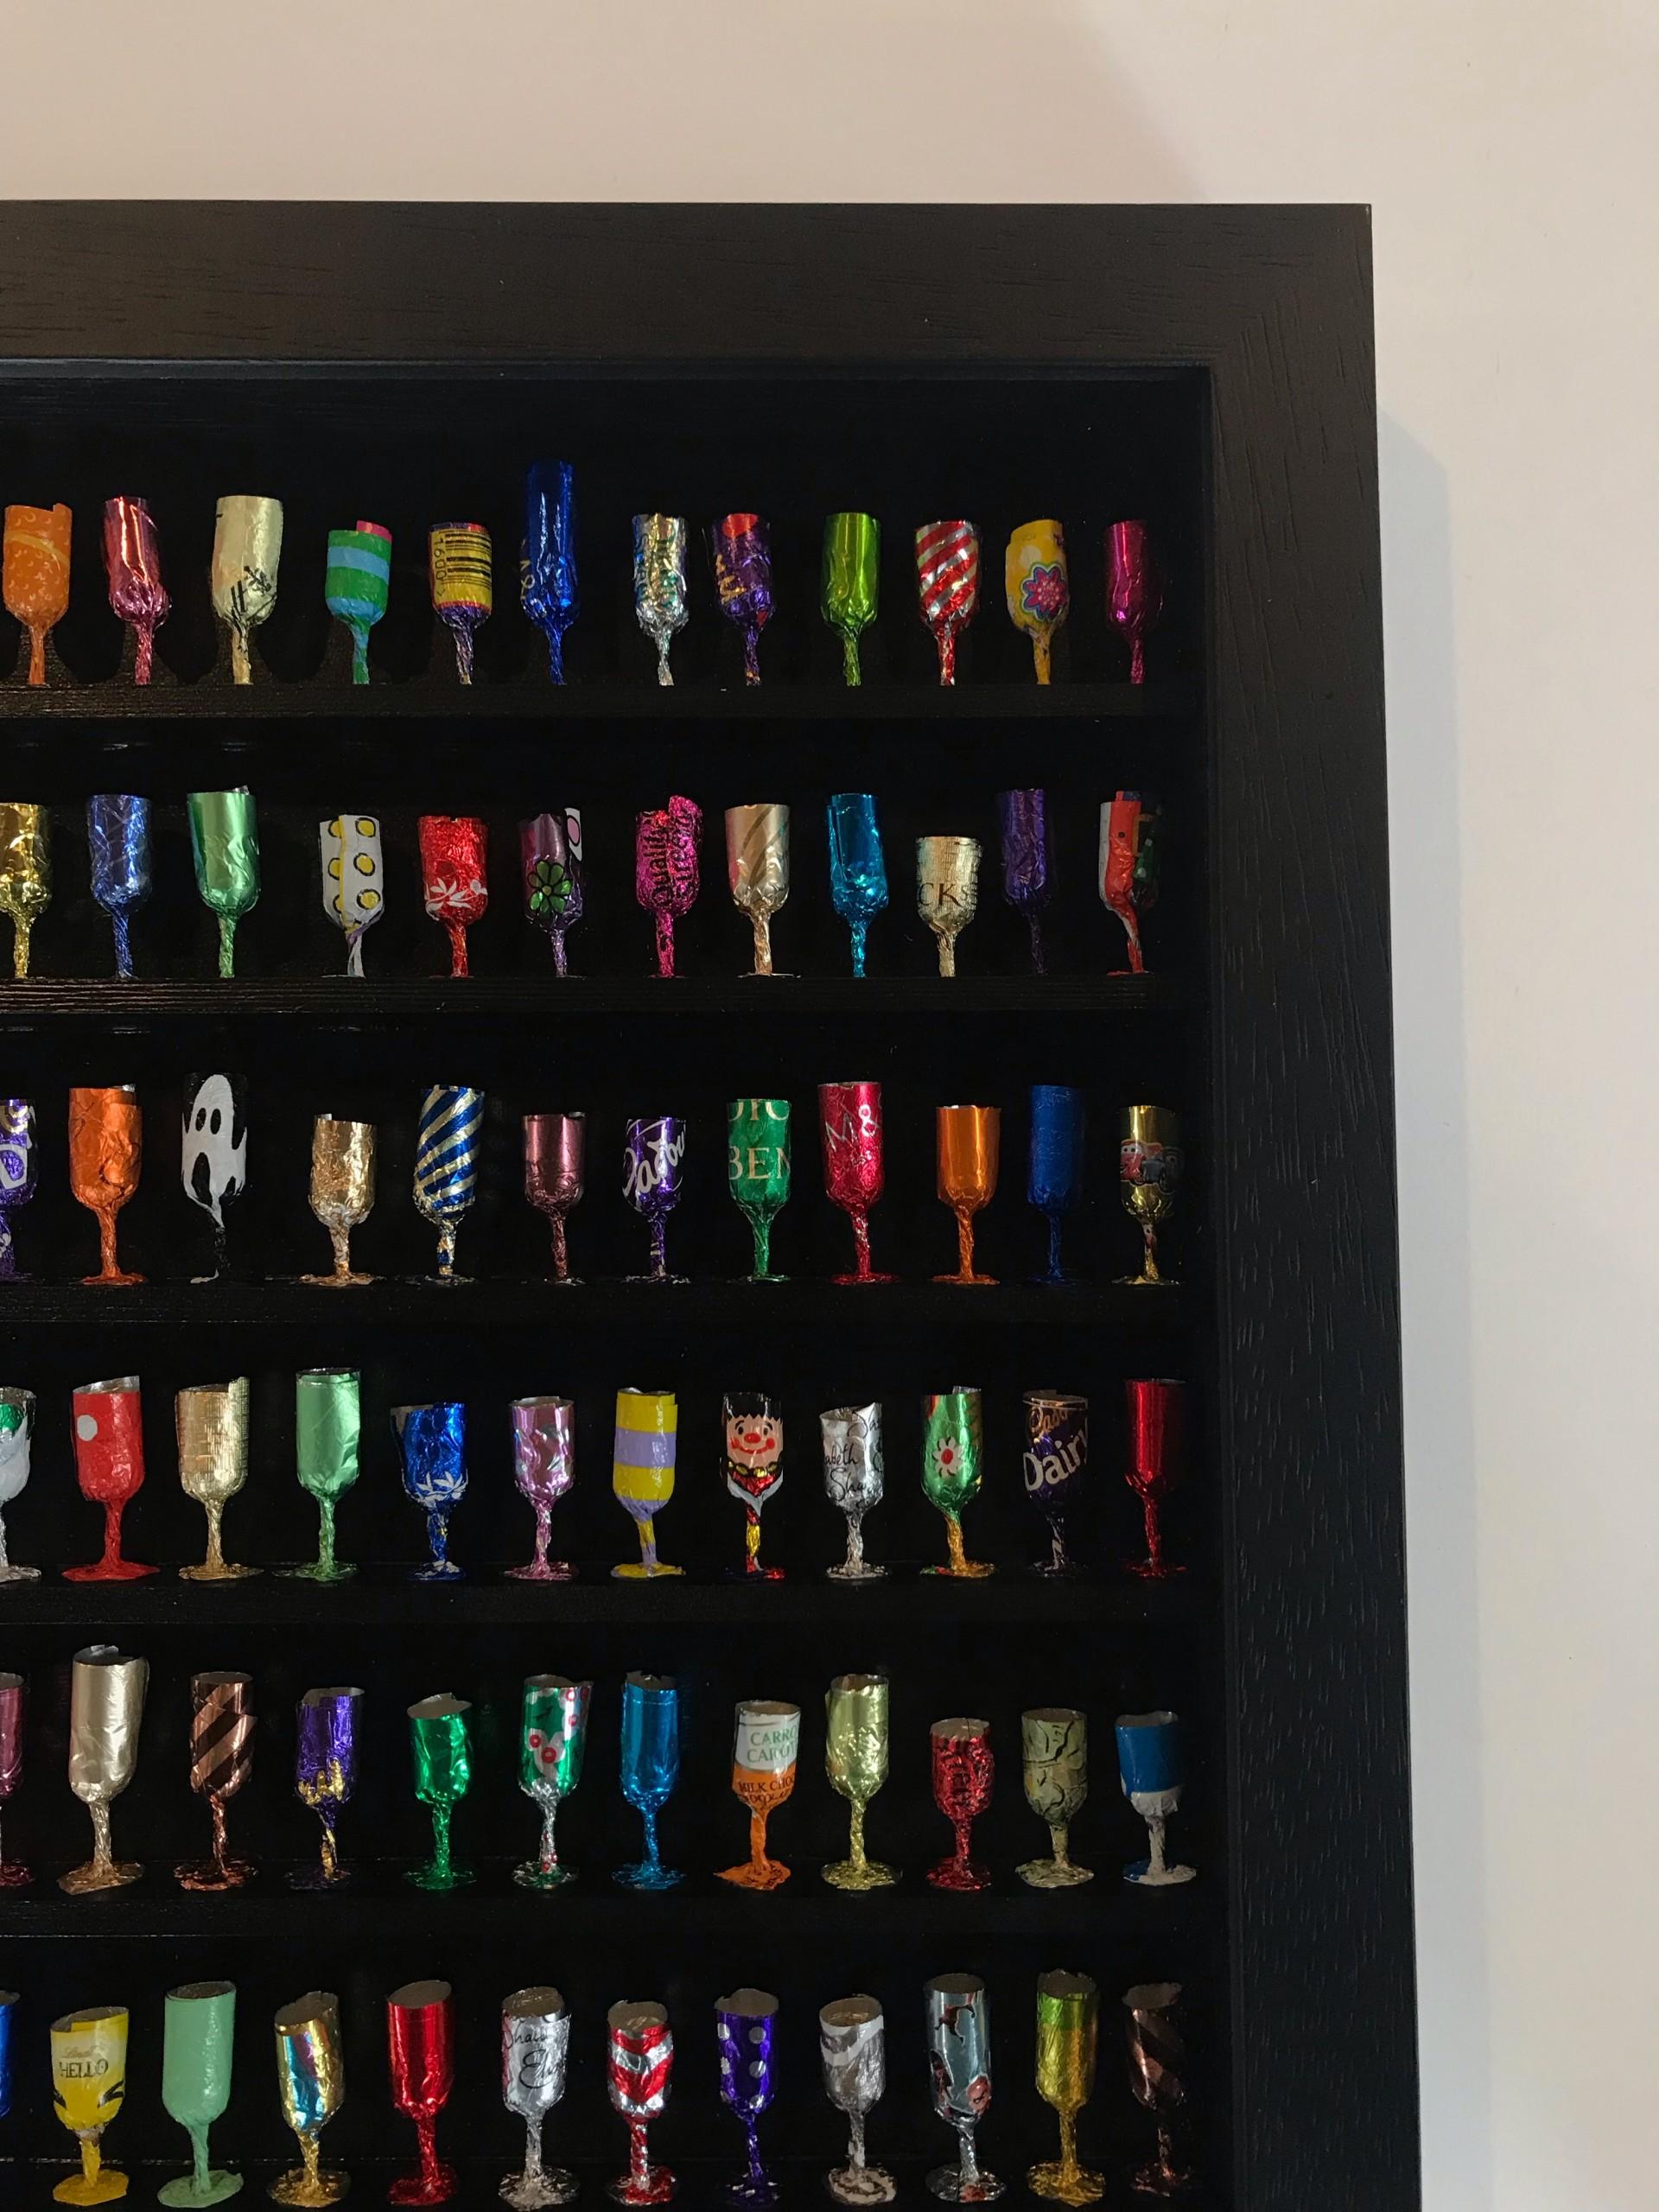 Goblets XXV is a signed original wall sculpture made from sweet wrappers by Joanne Tinker of a selection of colourful wine goblets on a black shelved frame.
Joanne Tinker wall sculptures available at Wychwood Art. Joanne Tinker seeks to transform